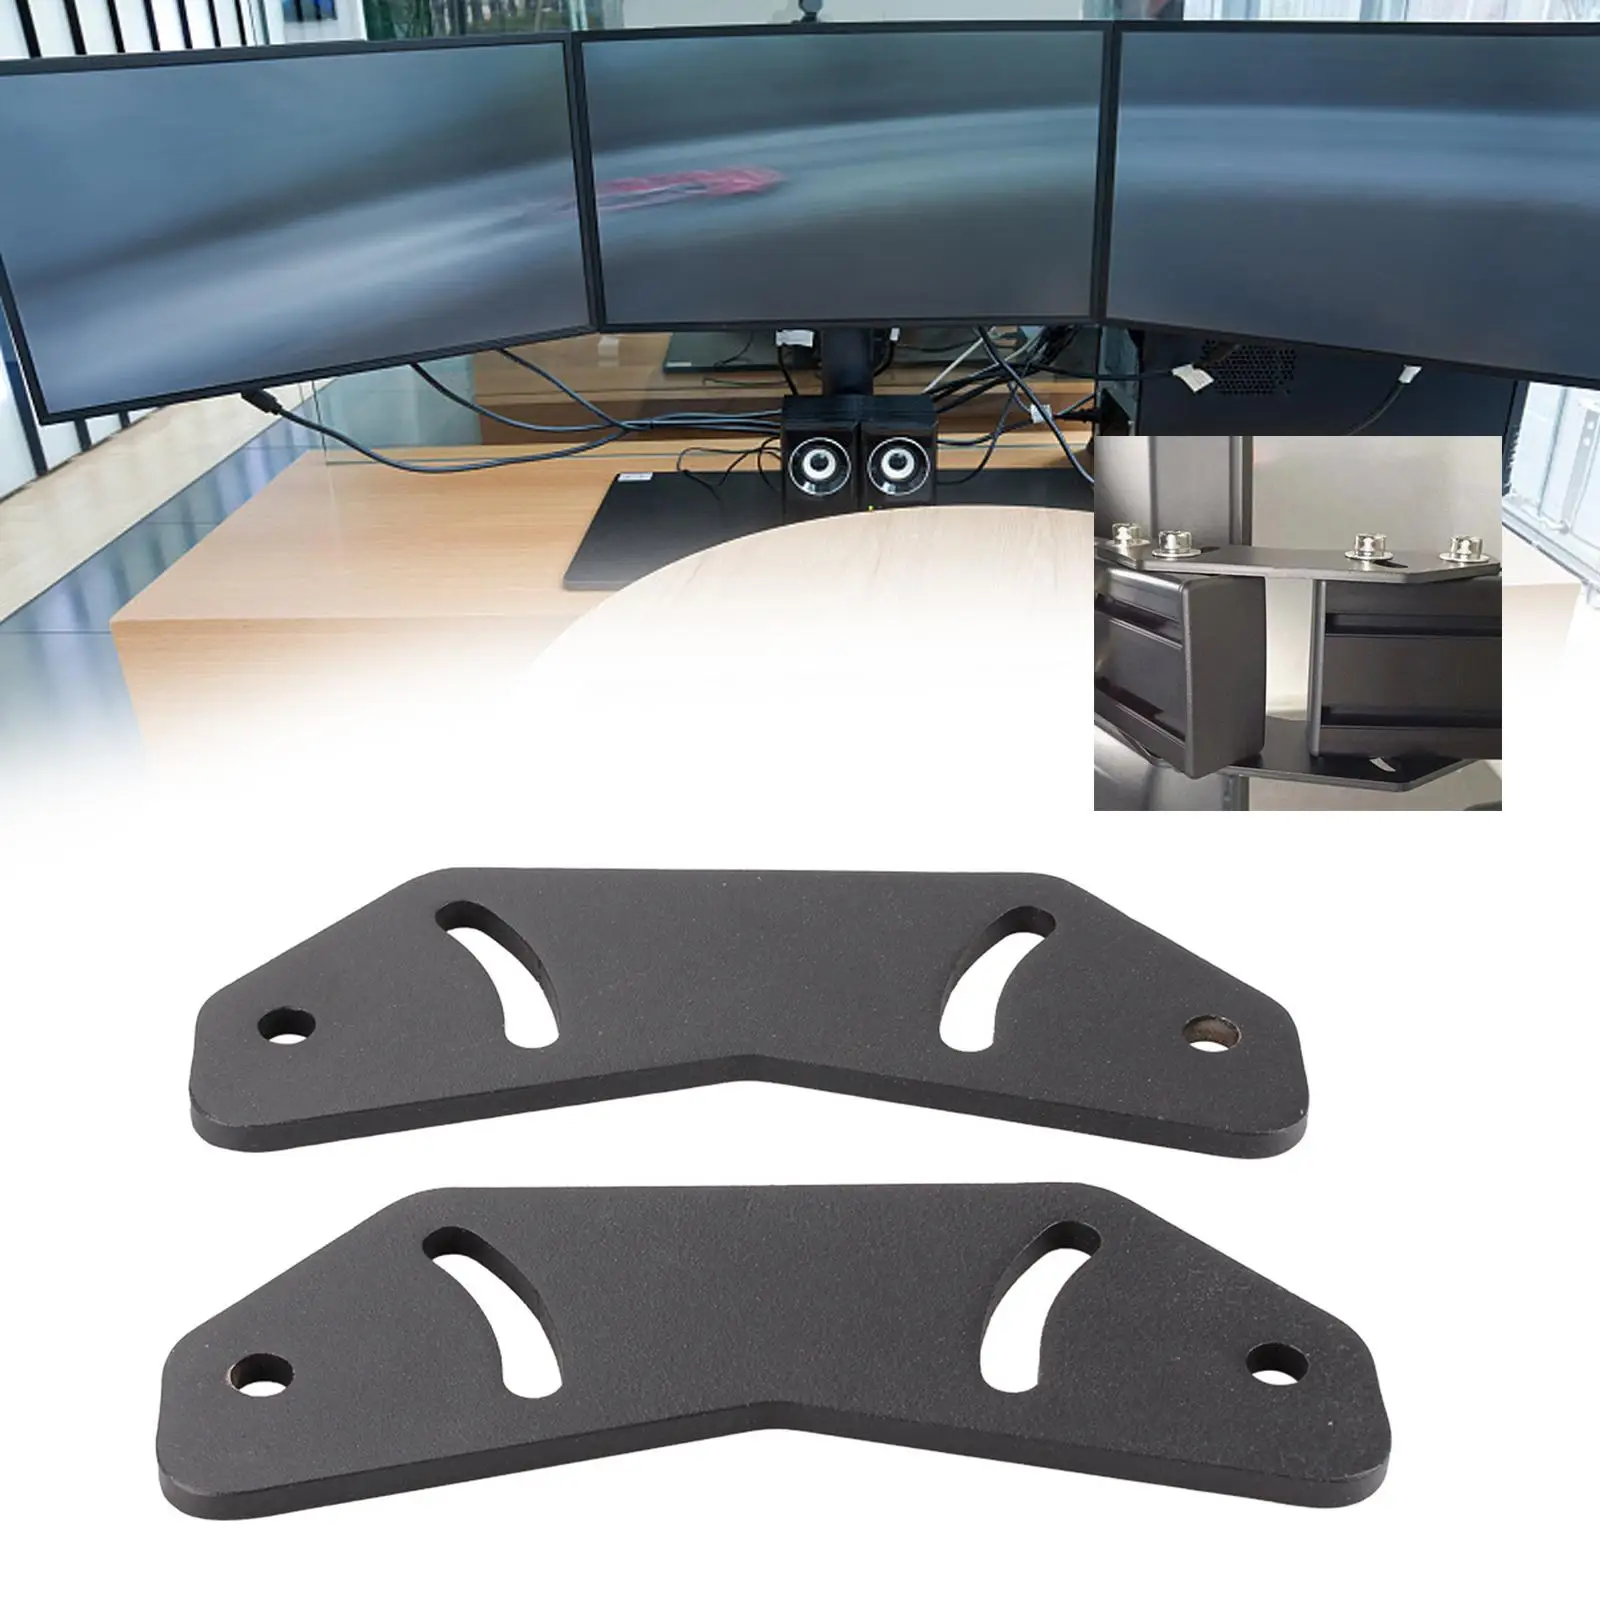 Bracket Fastener for Racing Game Computer Three Monitor Easily Install Heavy Duty Structure ,Black Universal Attachment